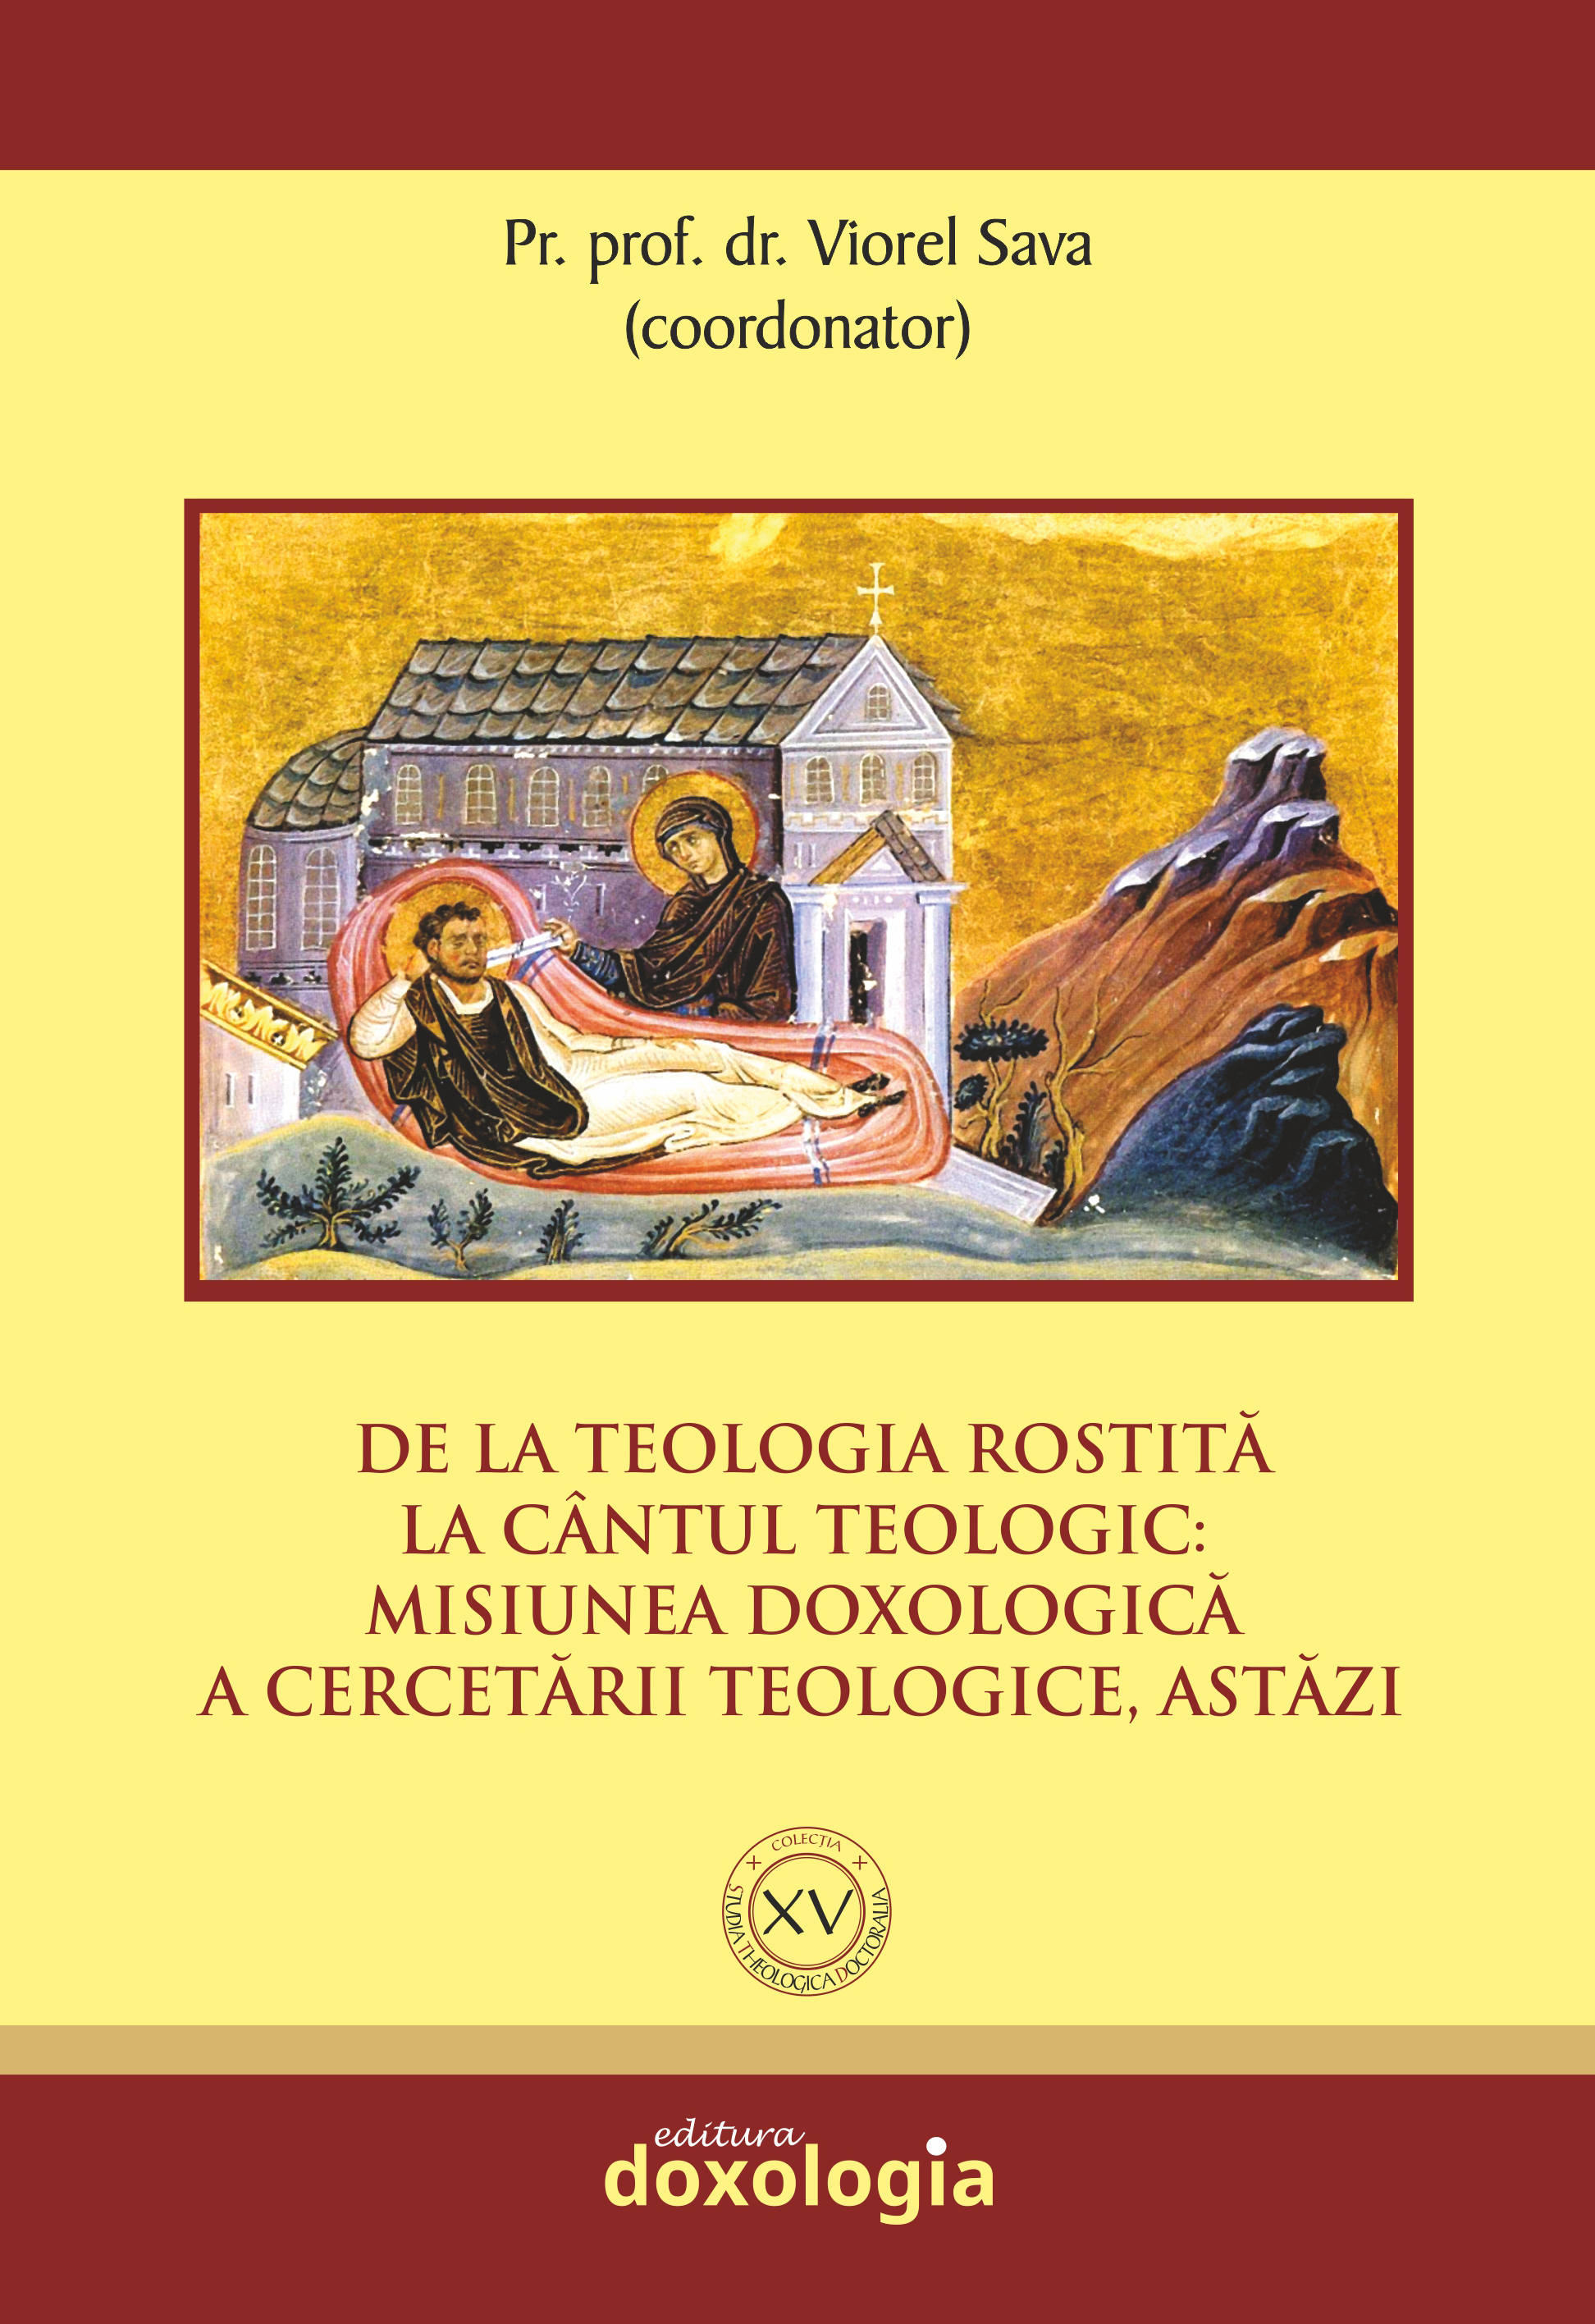 The Abbot Antipa from Calapodești (1816-1882), 3 years of life in the Monastery of "All Saints of Romania and Athon" Bucium, Iasi Cover Image